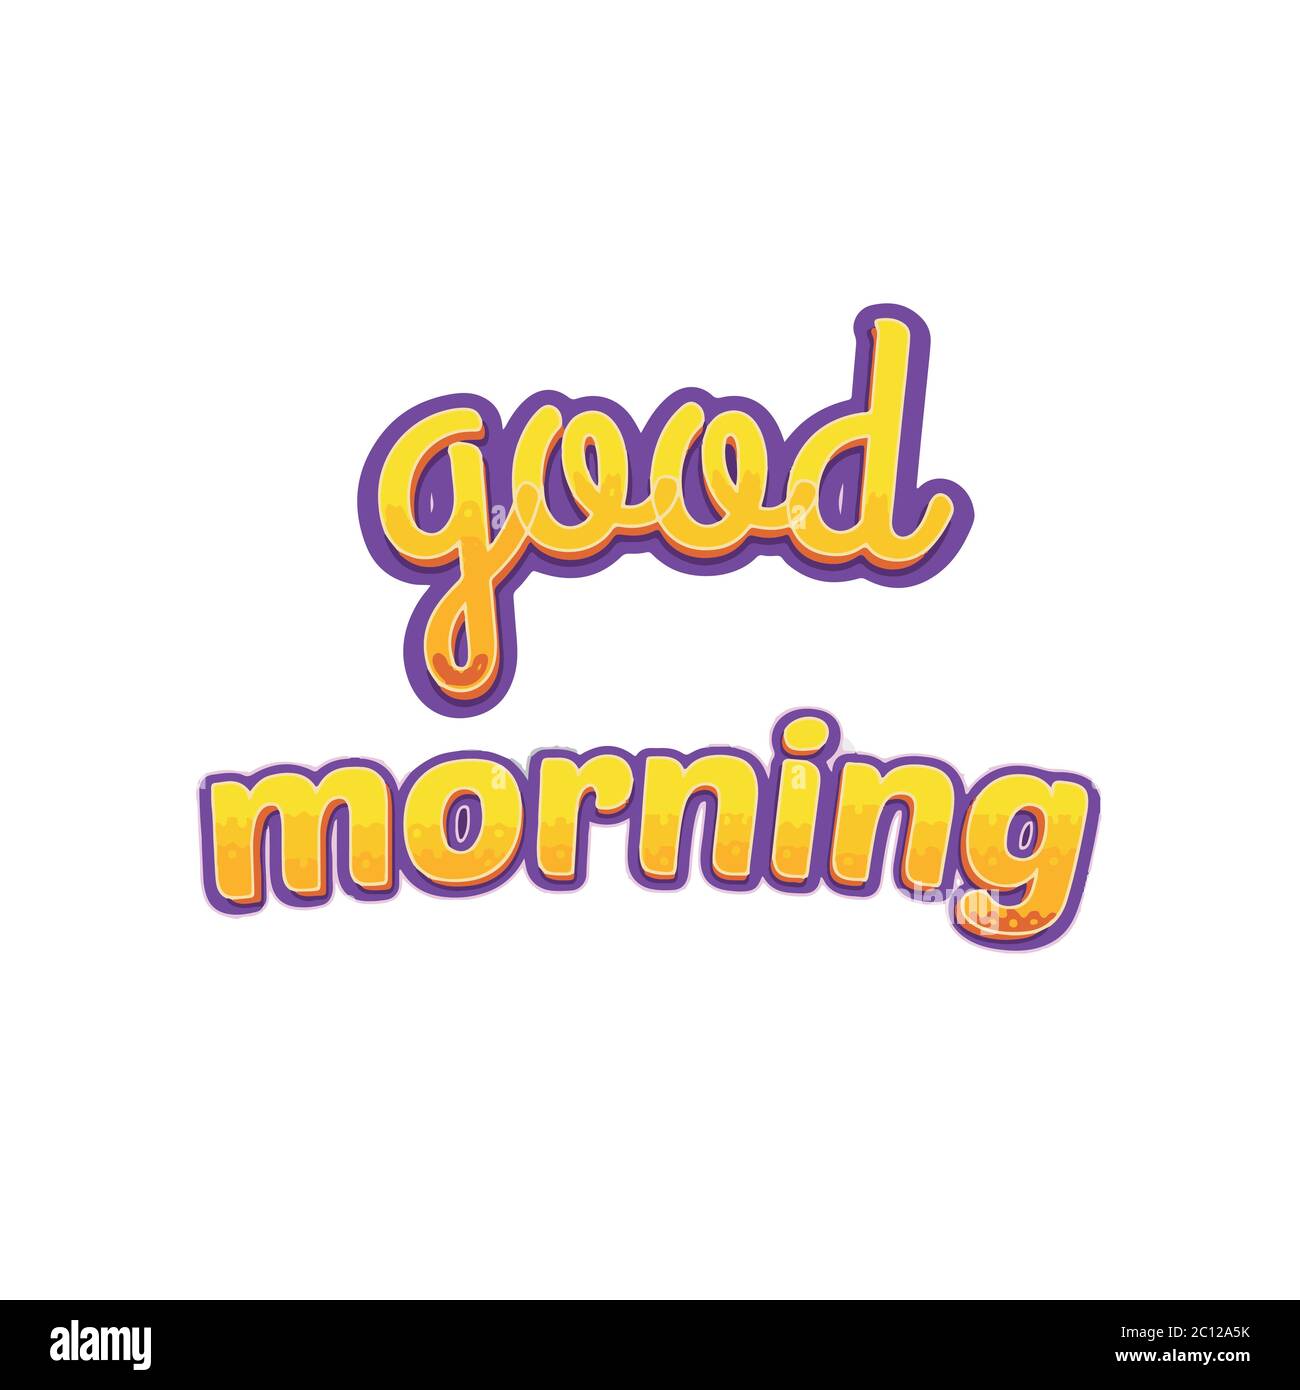 Good morning 3d quote simple positive message Stock Vector